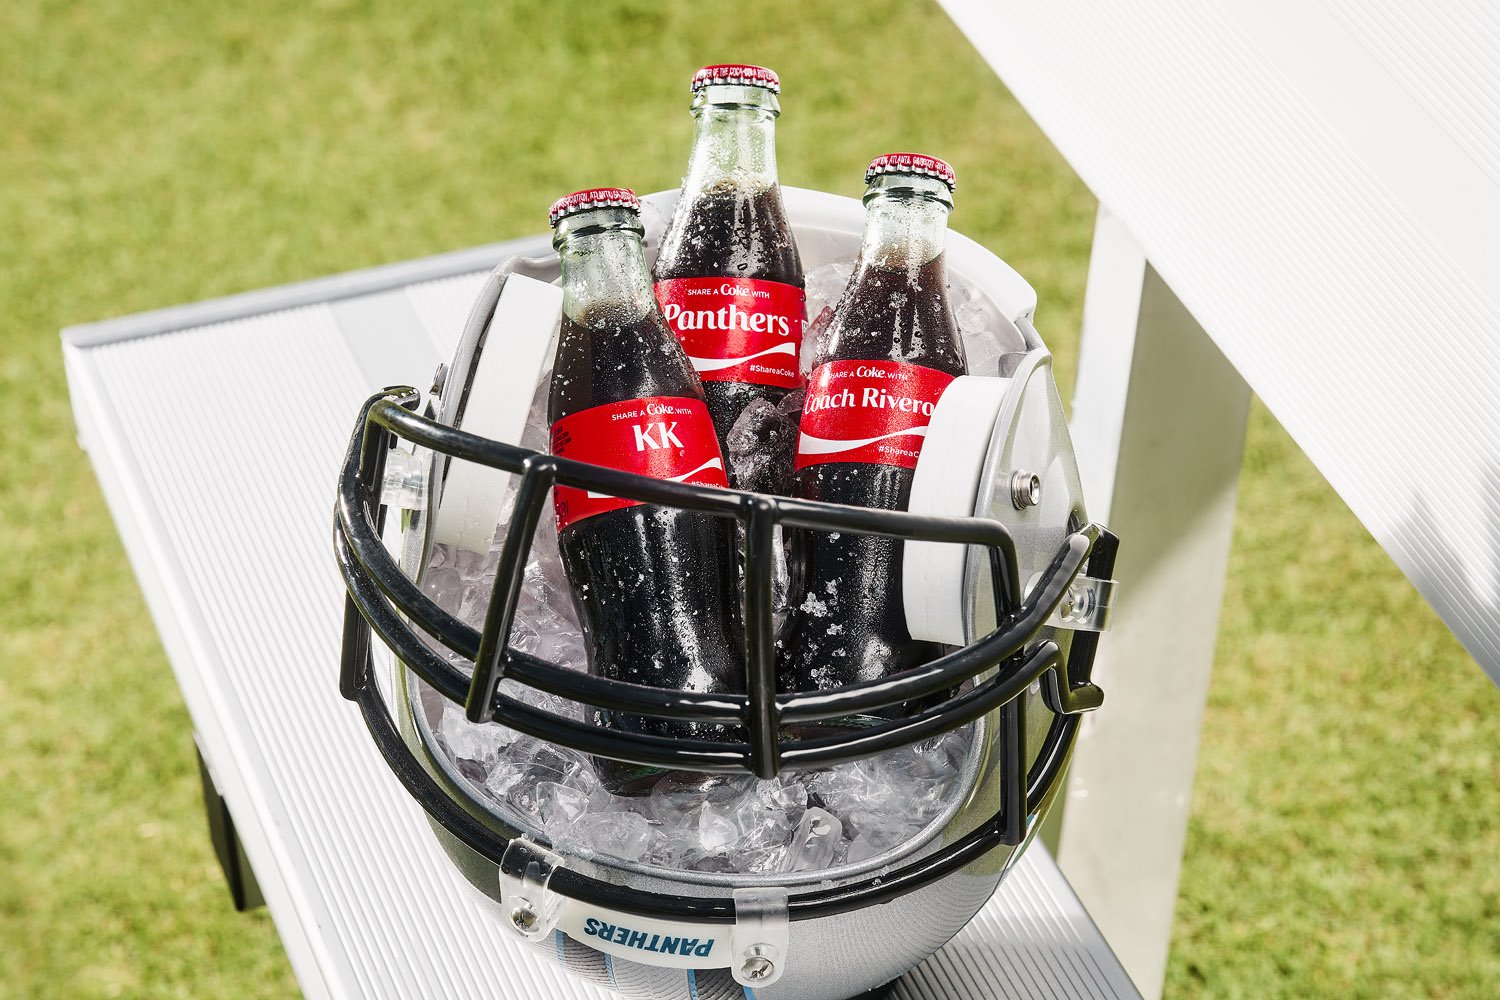 Still life product photo of three glass Coca-Cola bottles inside of an upside down football helmet filled with ice